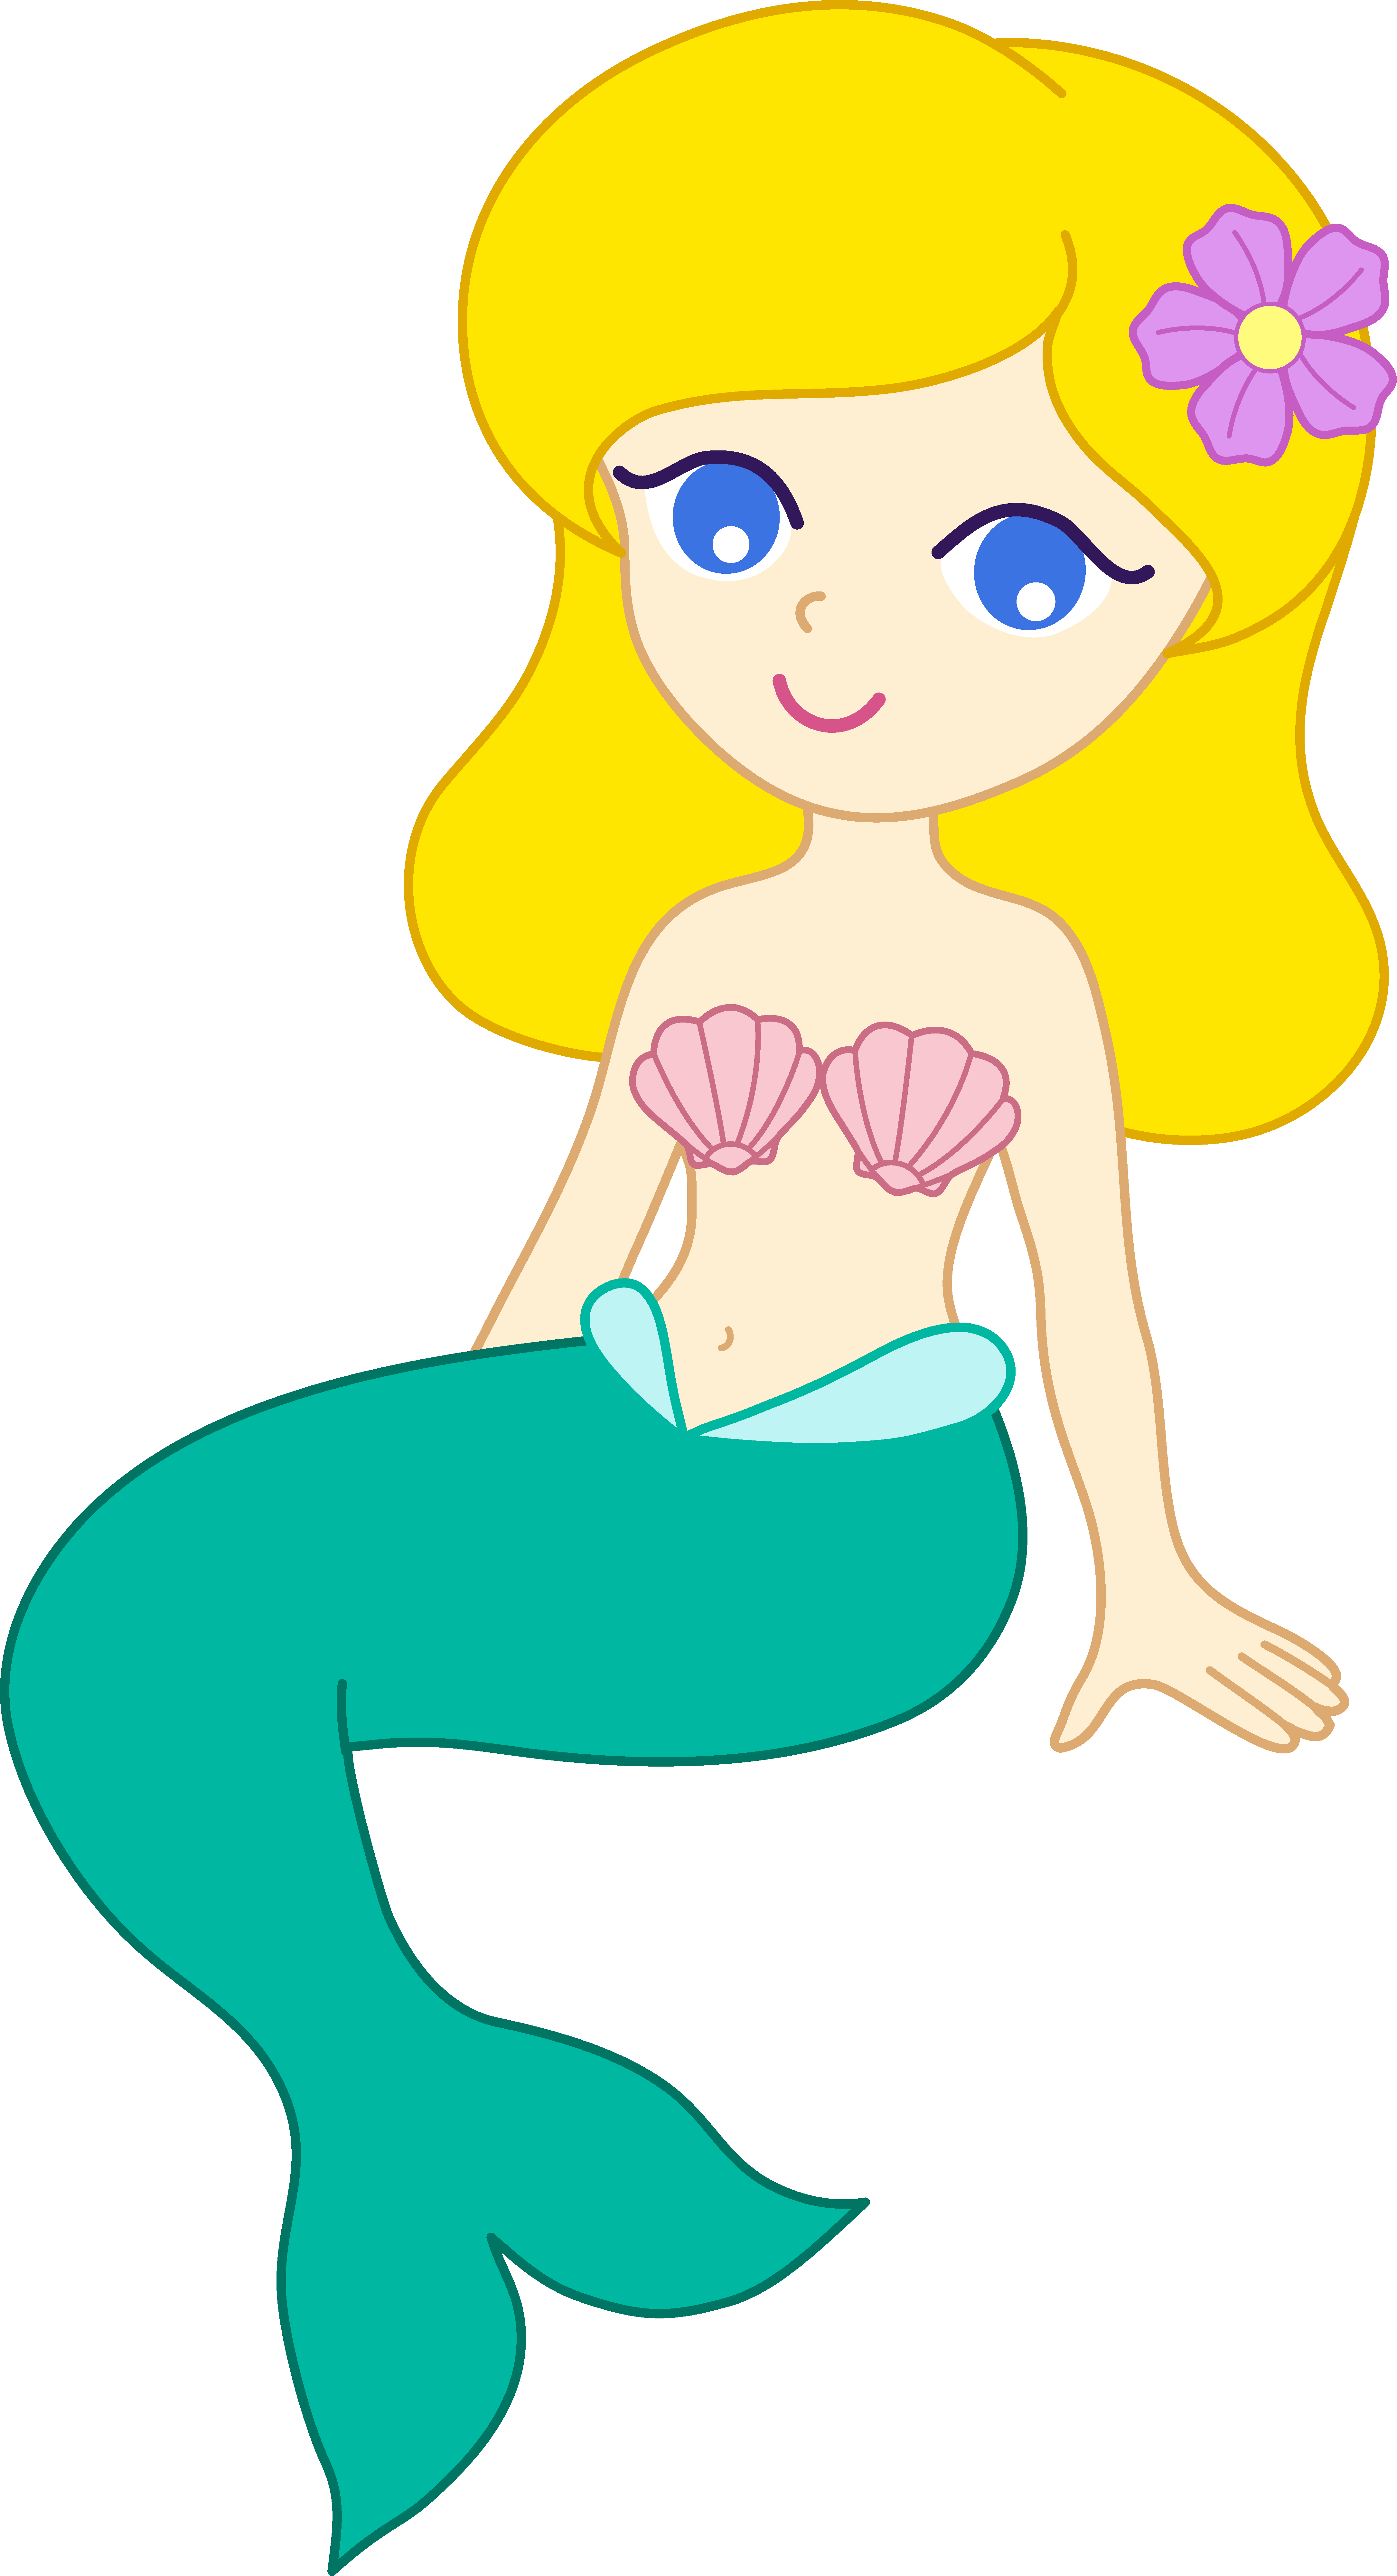 Mermaid clipart background. Free at getdrawings com